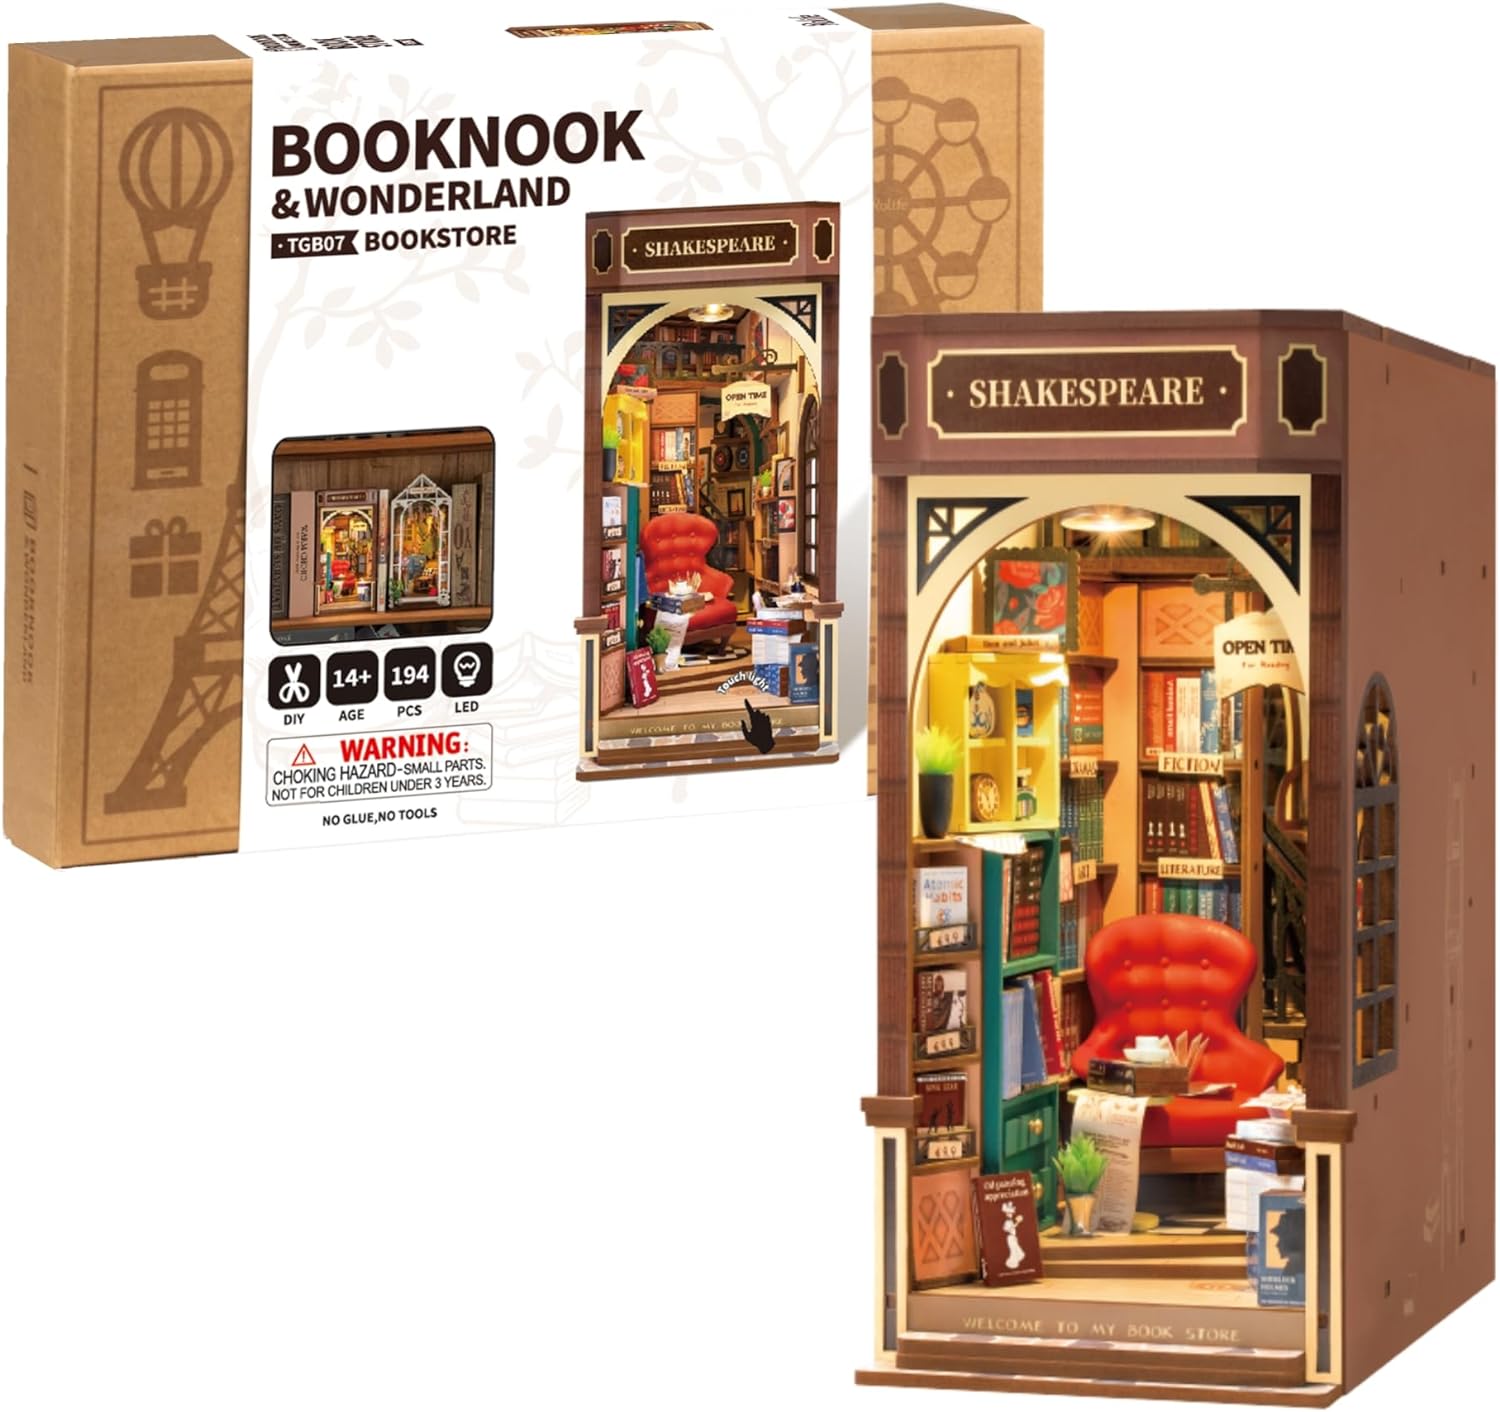 ROBOTIME Book Nook Kit for Adults Vintage Decorative Bookend DIY Miniature House Bookshelf Insert Decor with LED Retro Wooden Puzzle Craft Hobby Diorama Gift